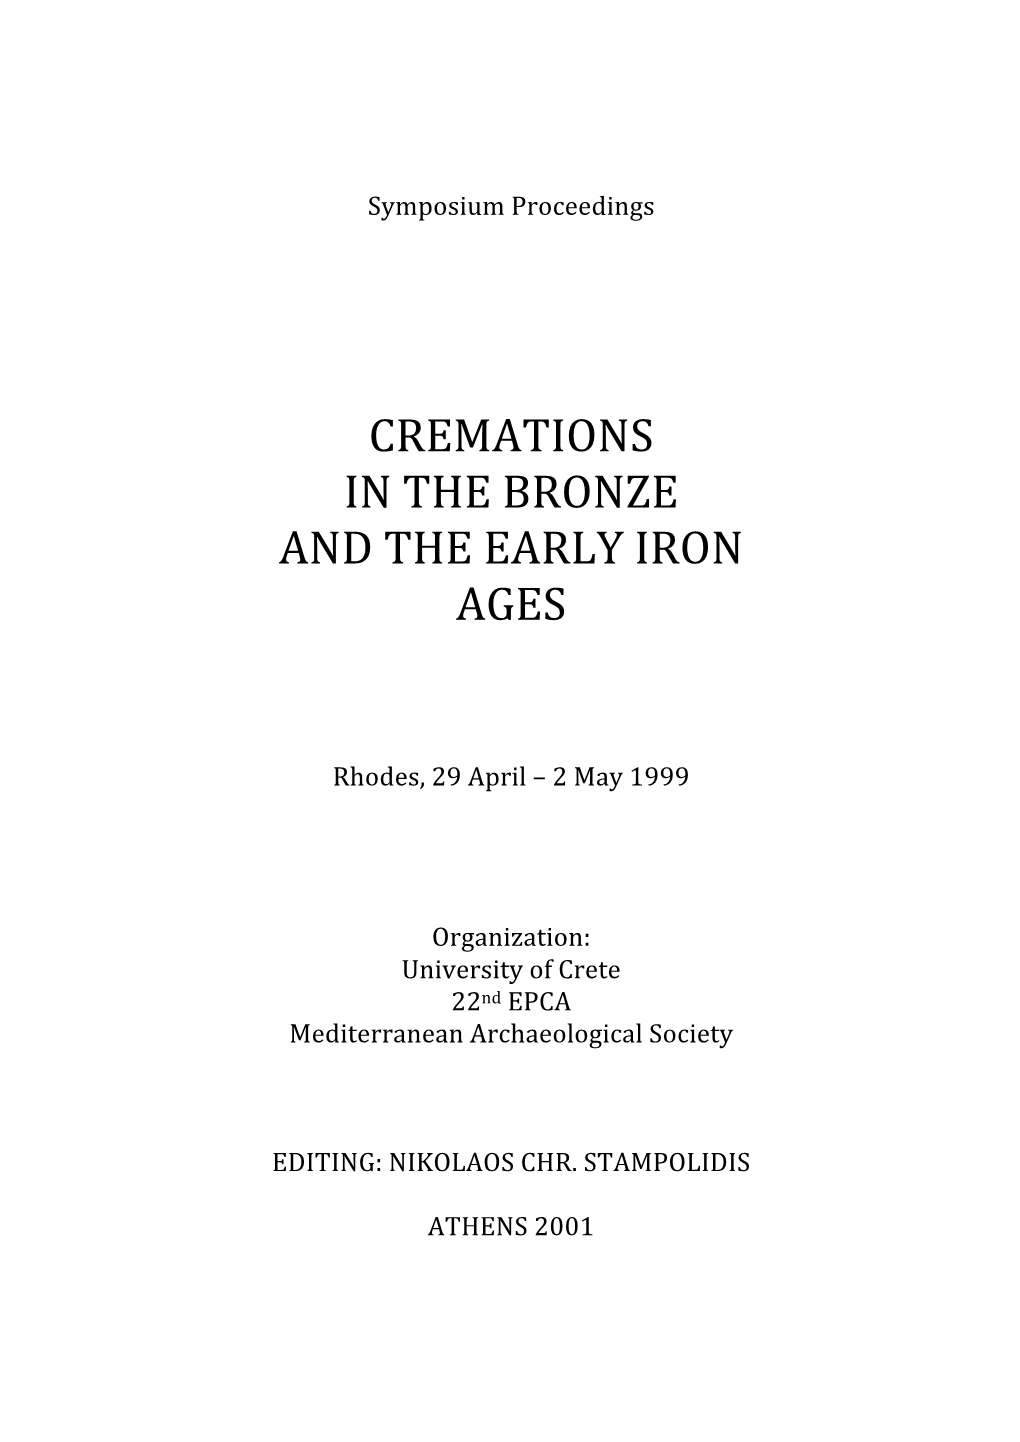 Cremations in the Bronze and the Early Iron Ages